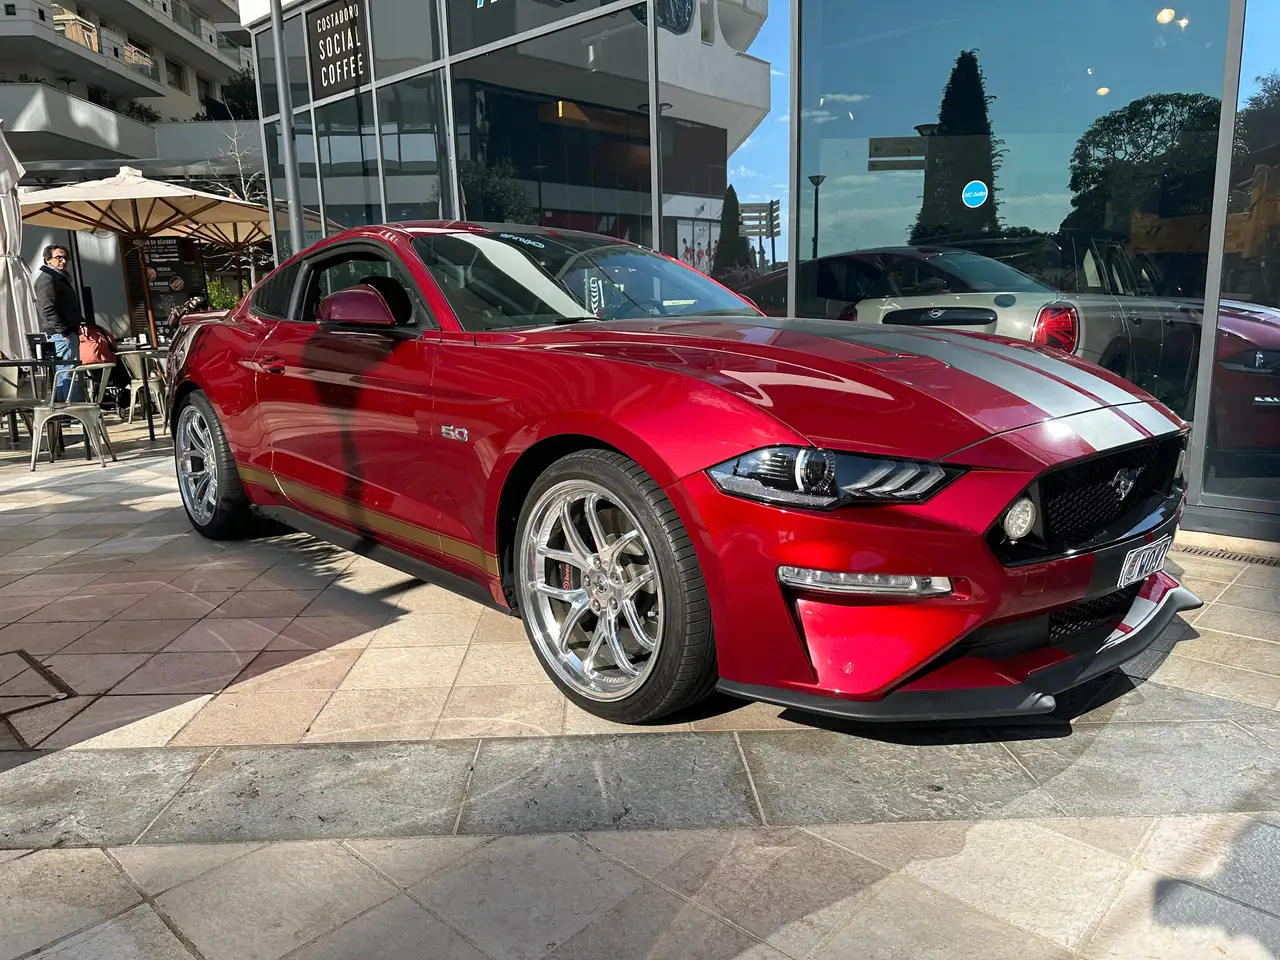 2019 - Ford Mustang Mustang Boîte automatique Coupé